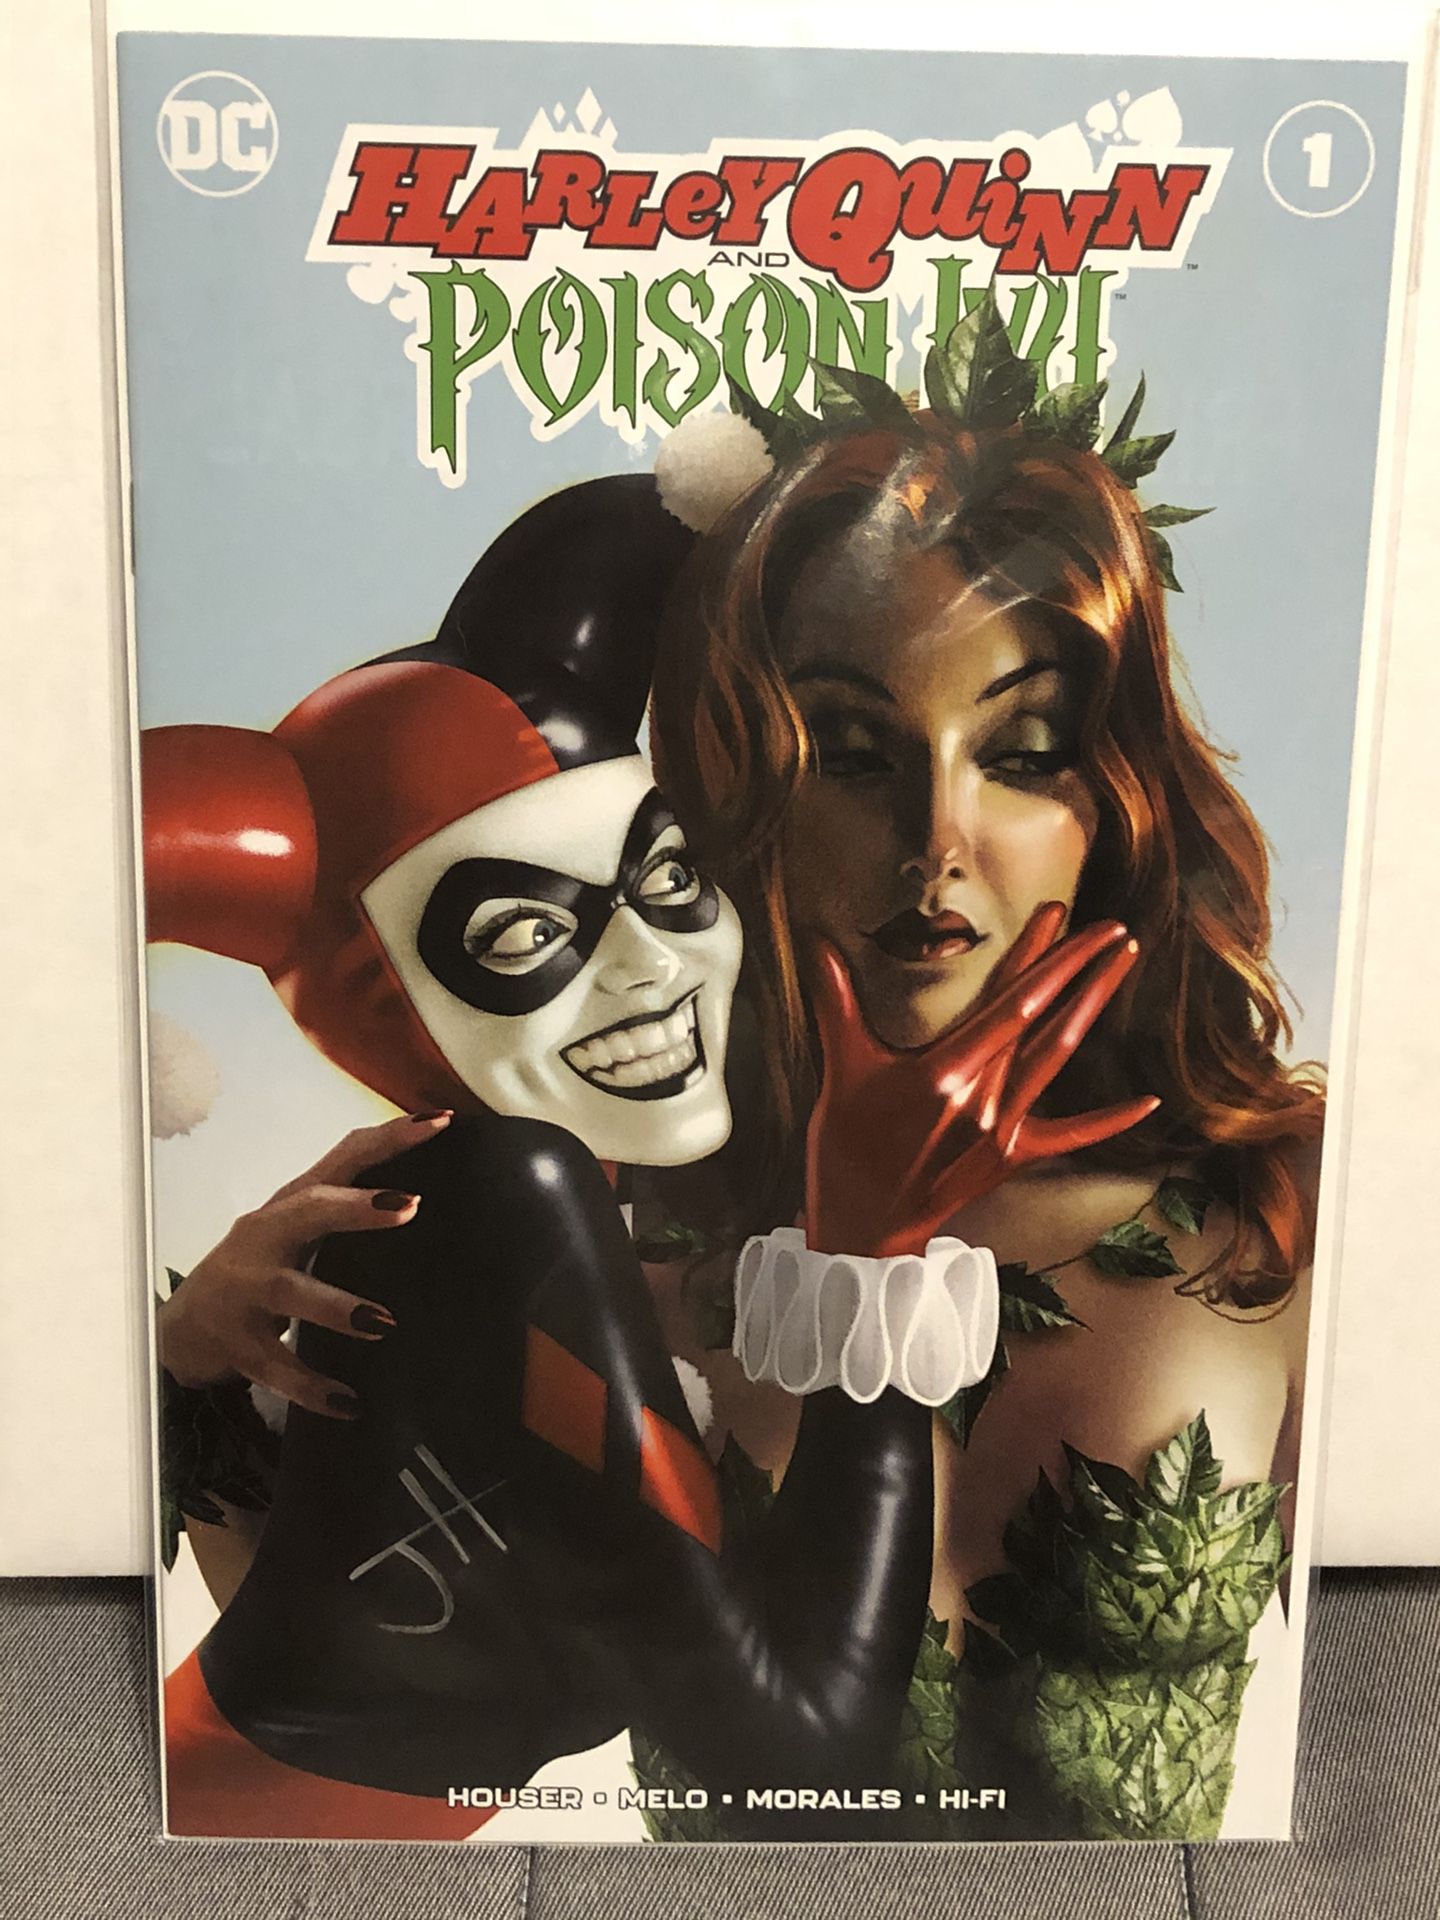 DC Comics HARLEY QUINN lot of 29 Comics including autographed harley & poison ivy #1 with COA!!!!